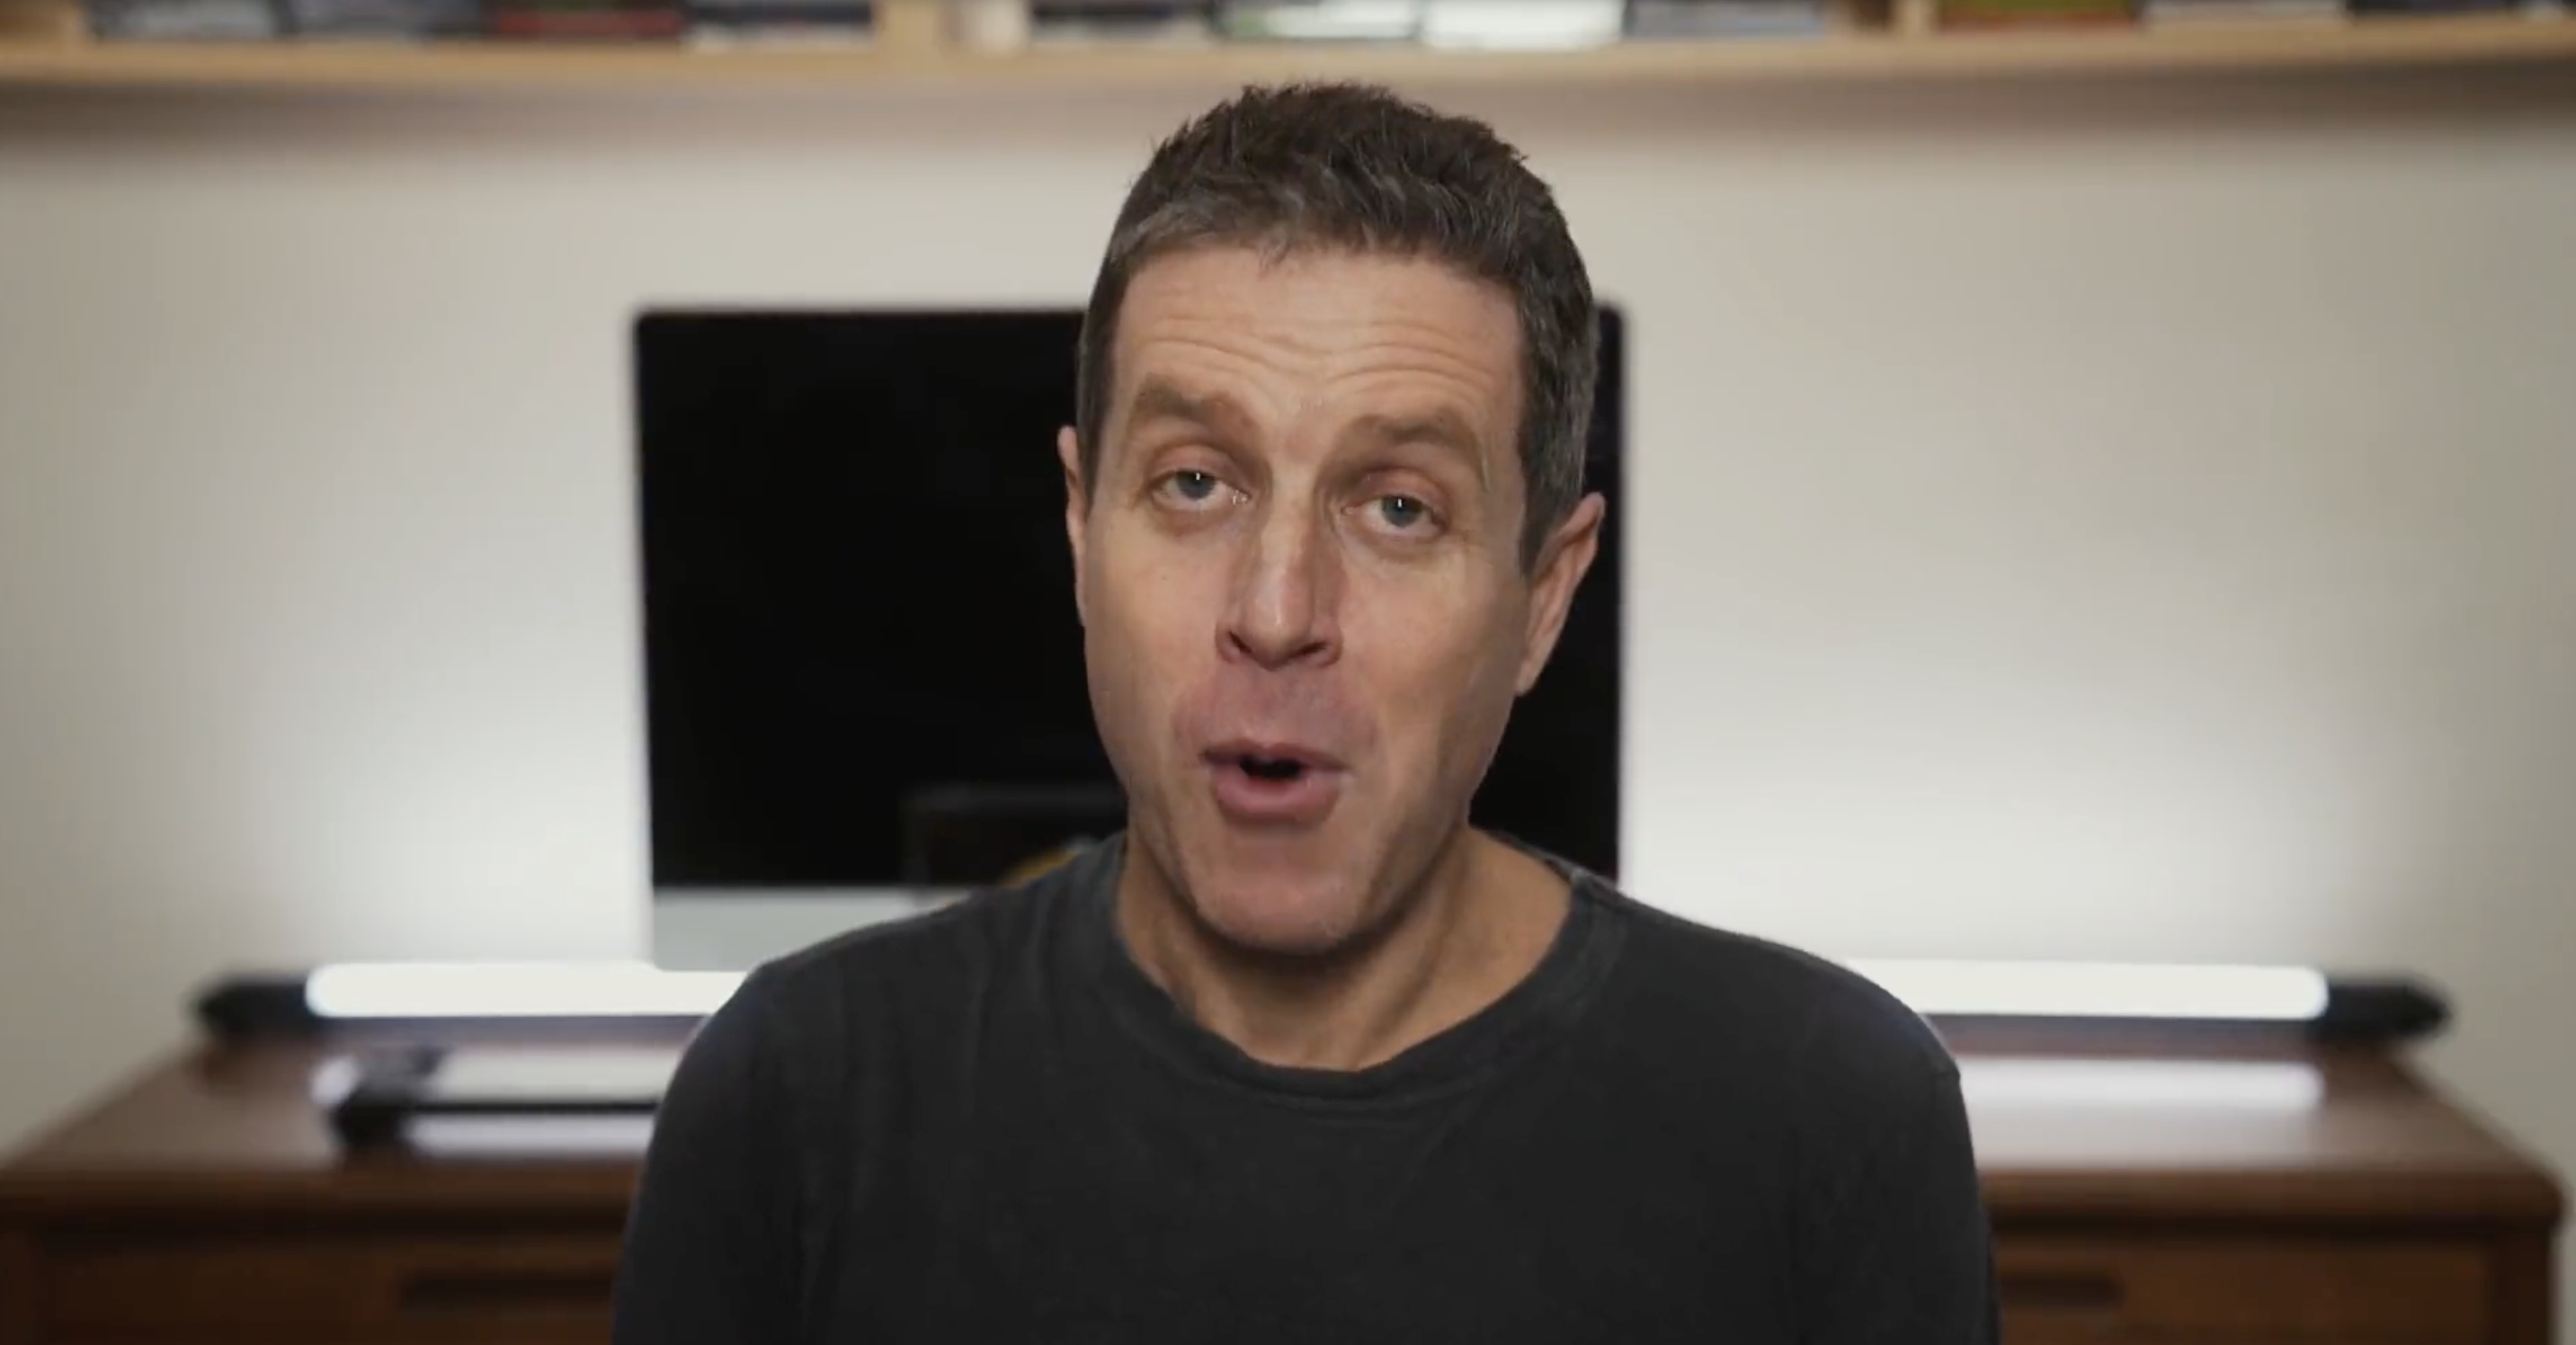 Geoff Keighley, a white man with brown hair, looks excited while sitting in front of a turned-off computer monitor